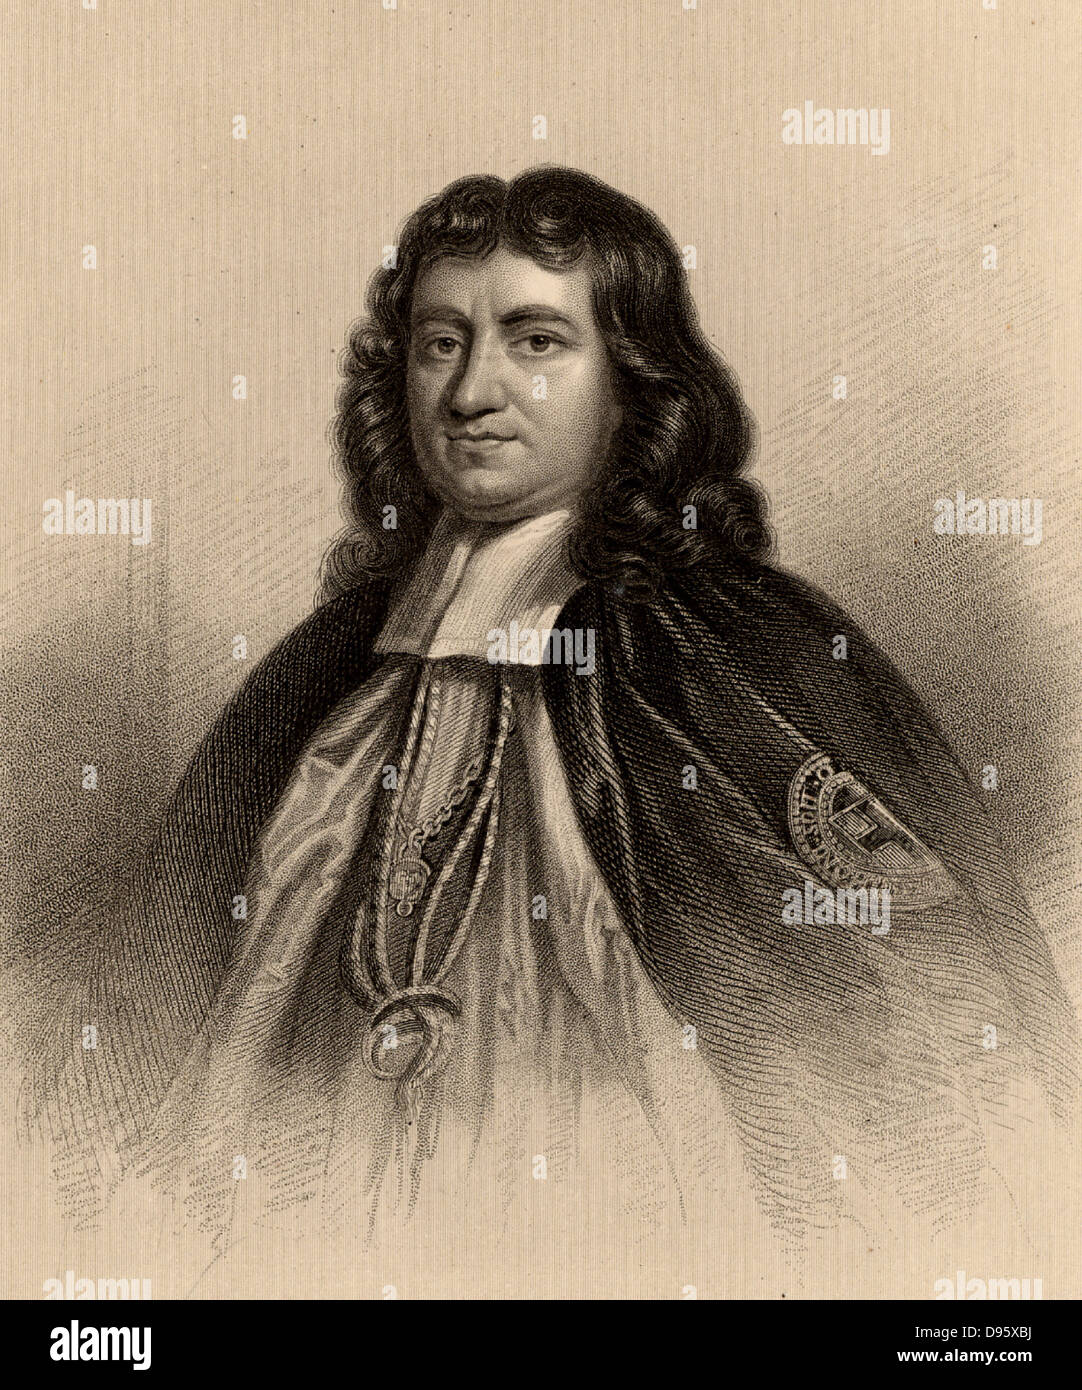 Gilbert Burnet (1643-1715) Scottish theologian and historian. A brilliant linguist, as well as his native English, he was fluent in Dutch, French, Latin, Greek and Hebrew.  On the flight of James II, he was appointed Bishop of Salisbury by William III. Author of 'The History of His Own Times' (London, 1723).  Engraving from 'A Biographical Dictionary of Eminent Scotsmen' by Thomas Thomson (1870). Stock Photo